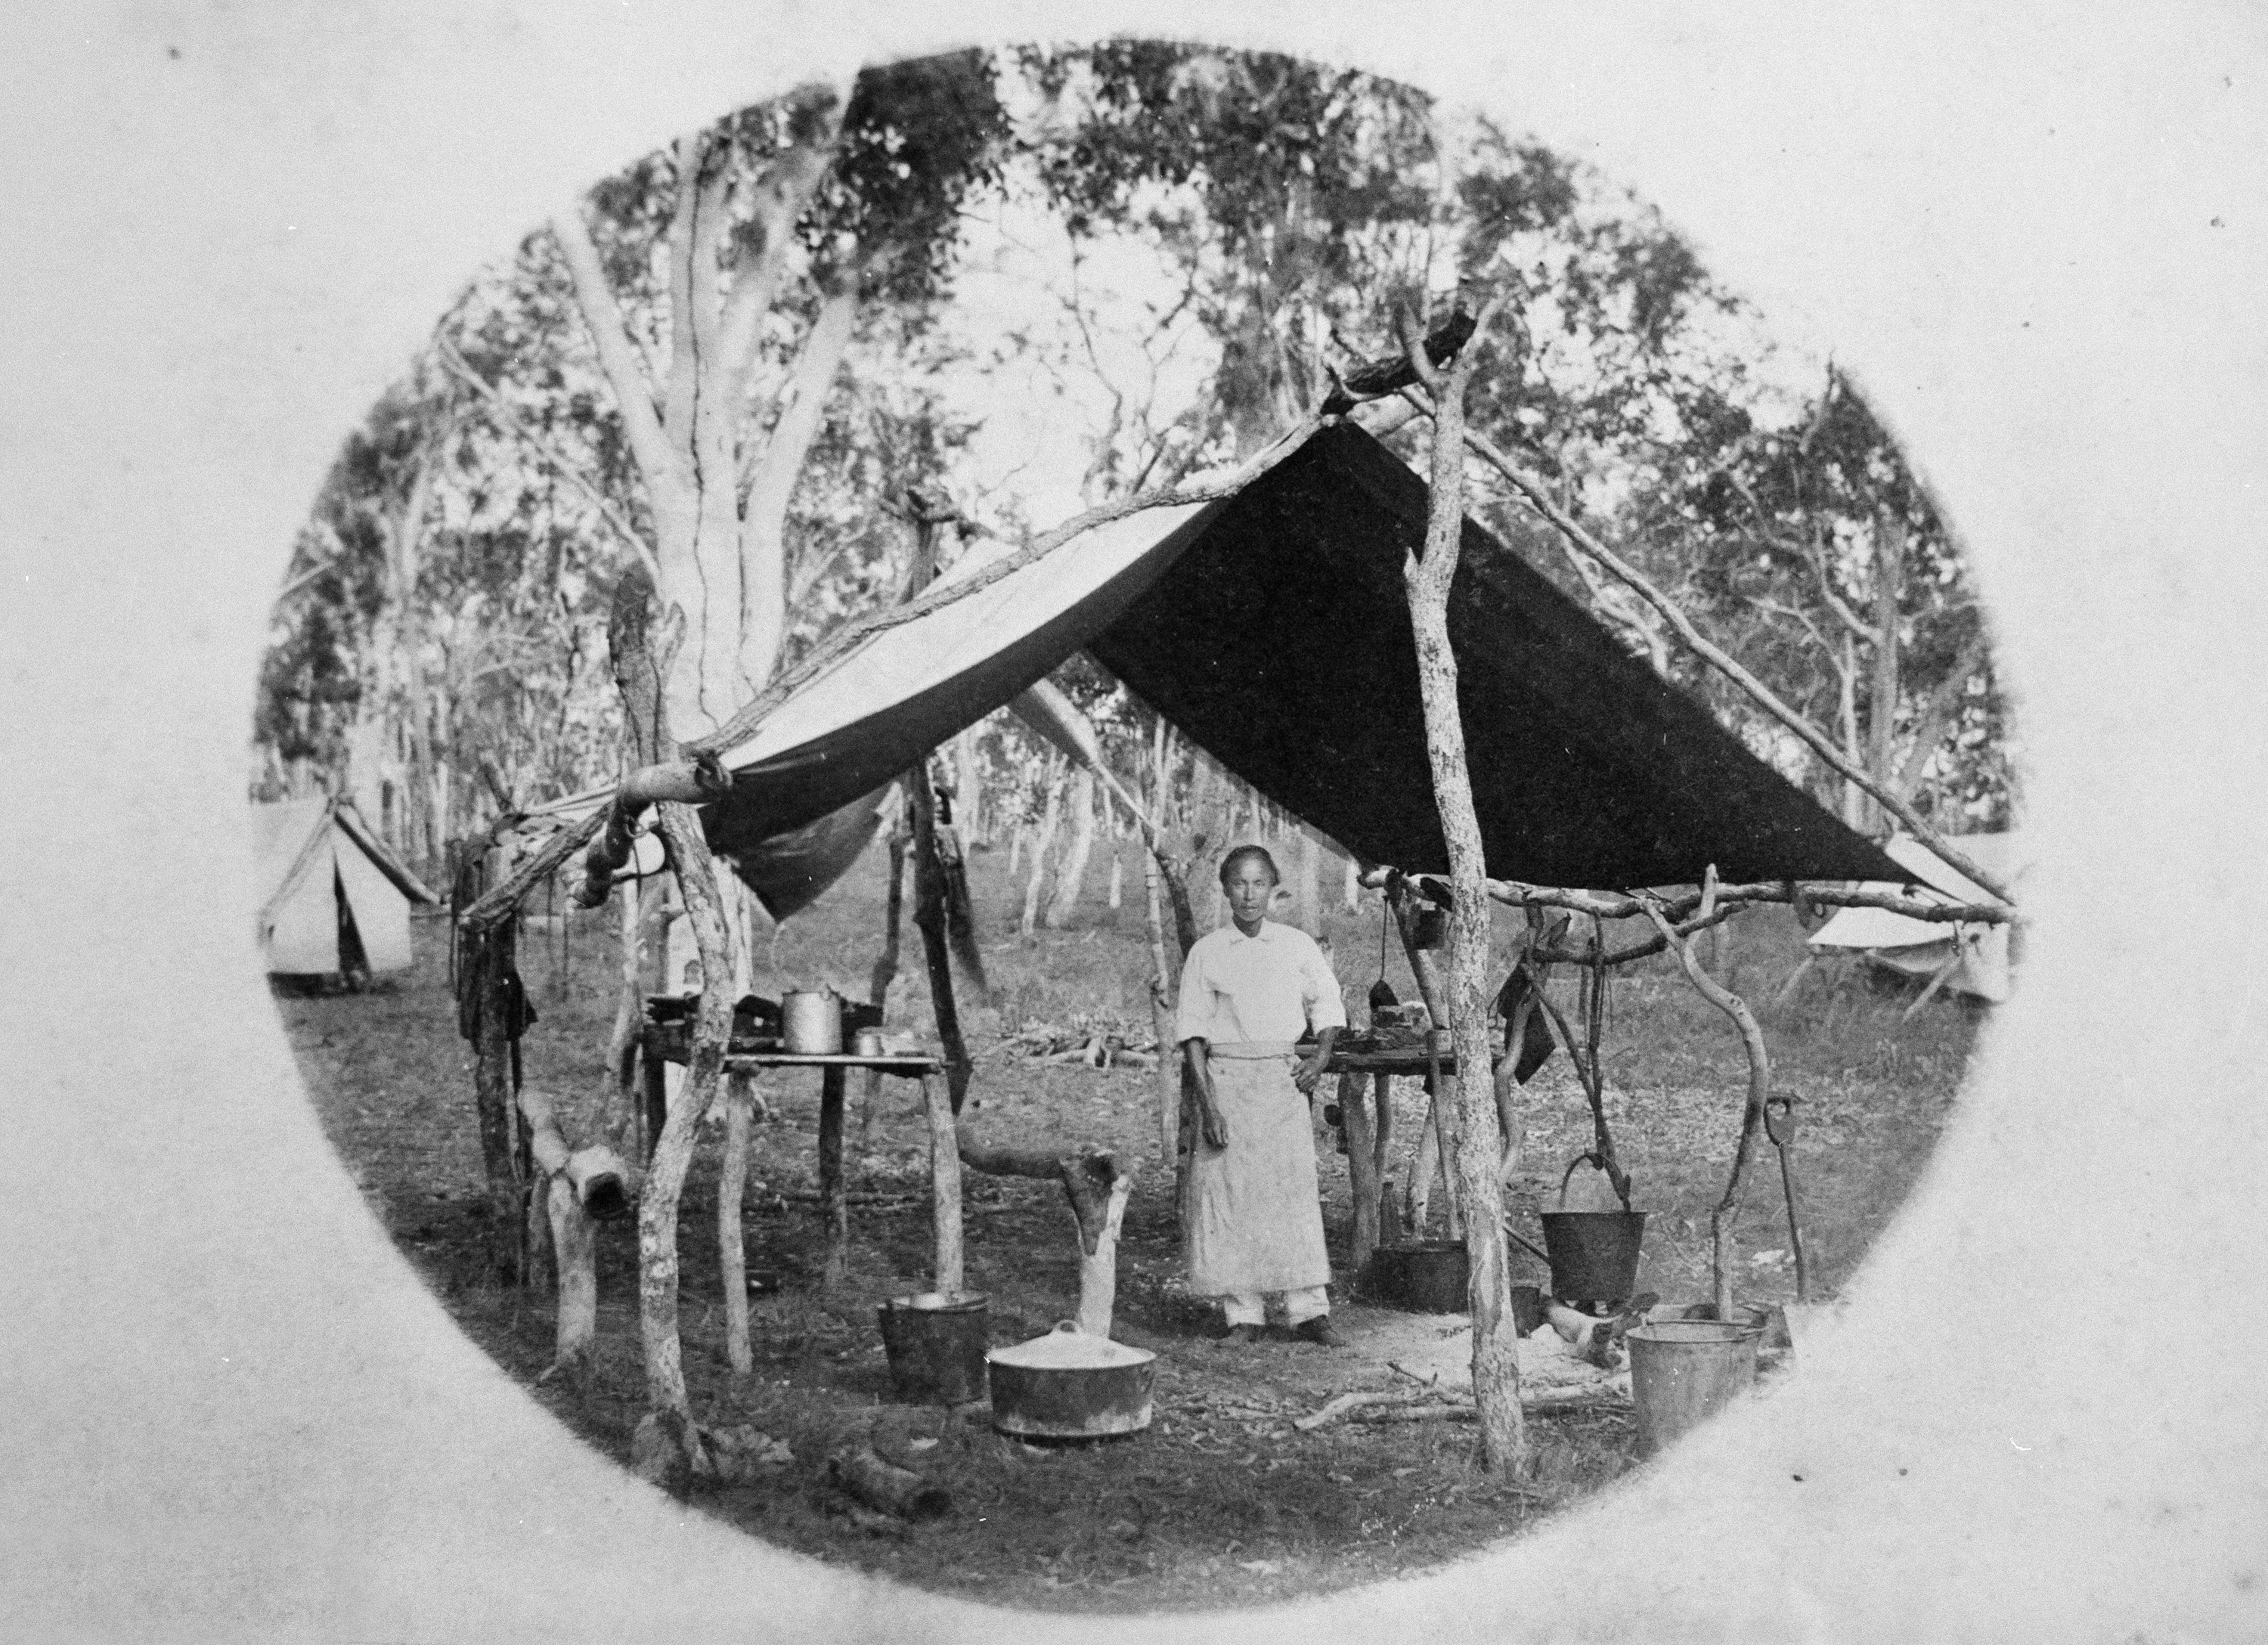 Image of a Chinese cook working in the temporary kitchen of a surveyor's camp, 1886